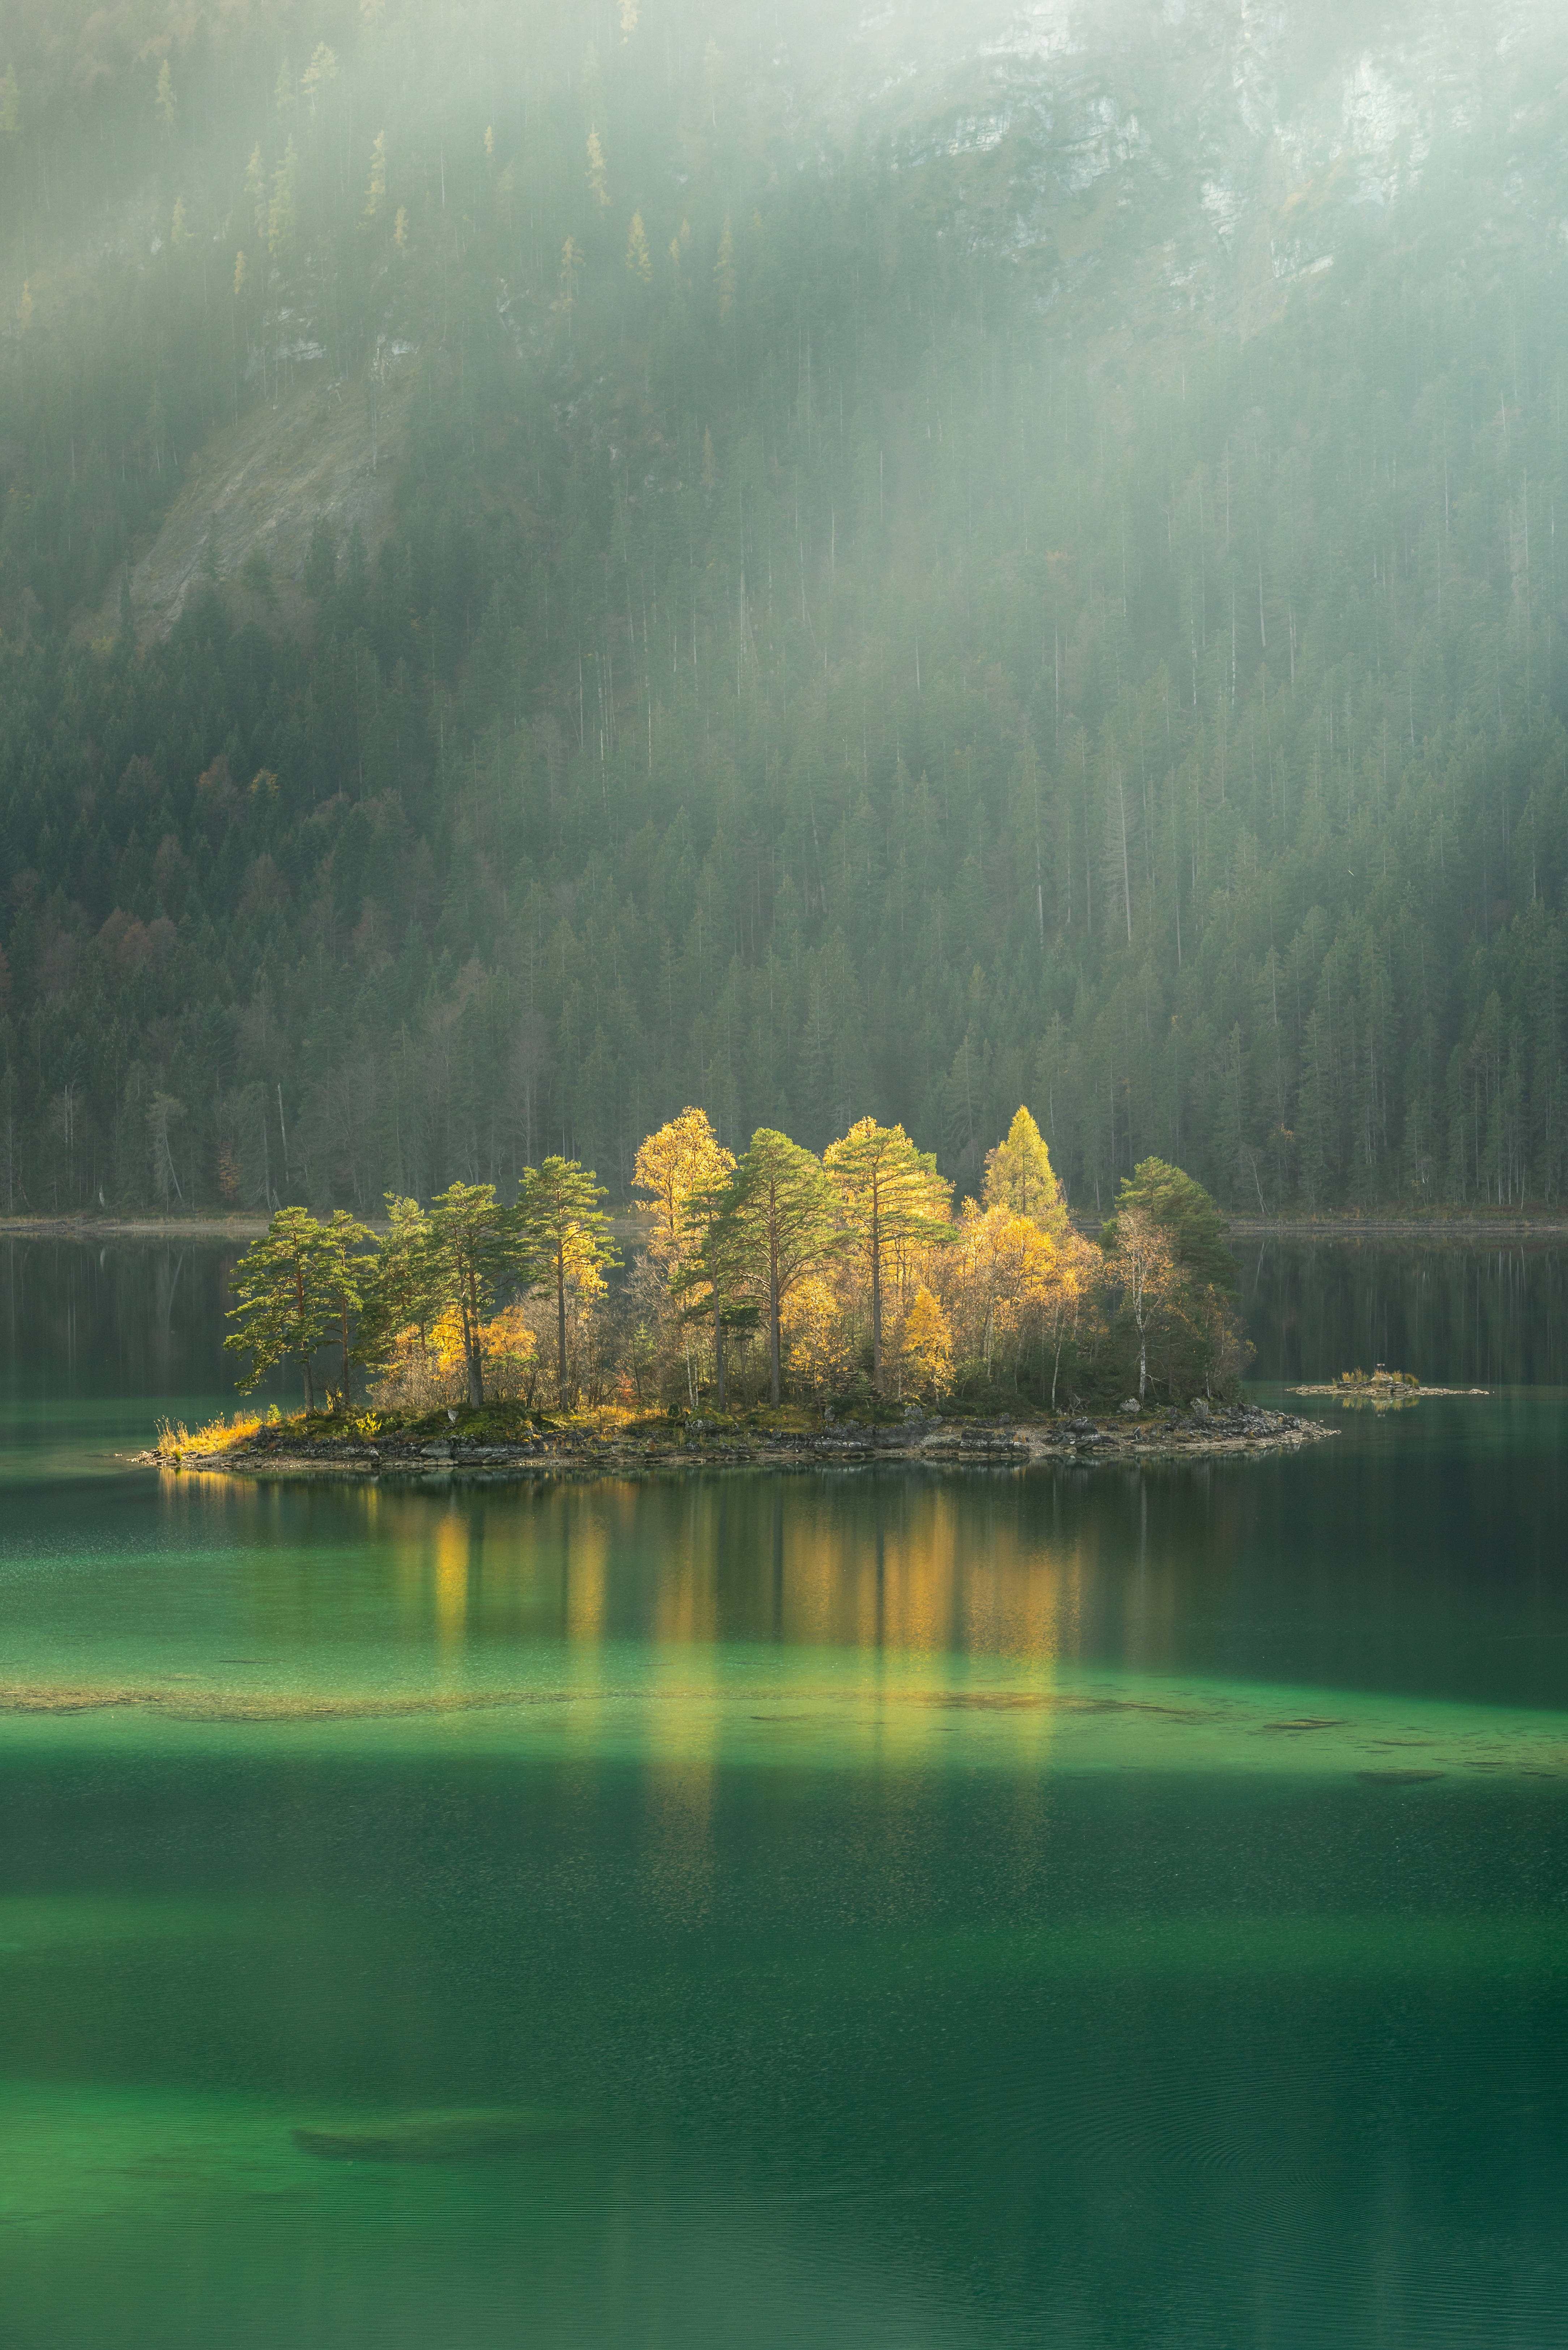 A small island with trees in the middle of a lake. - Lake